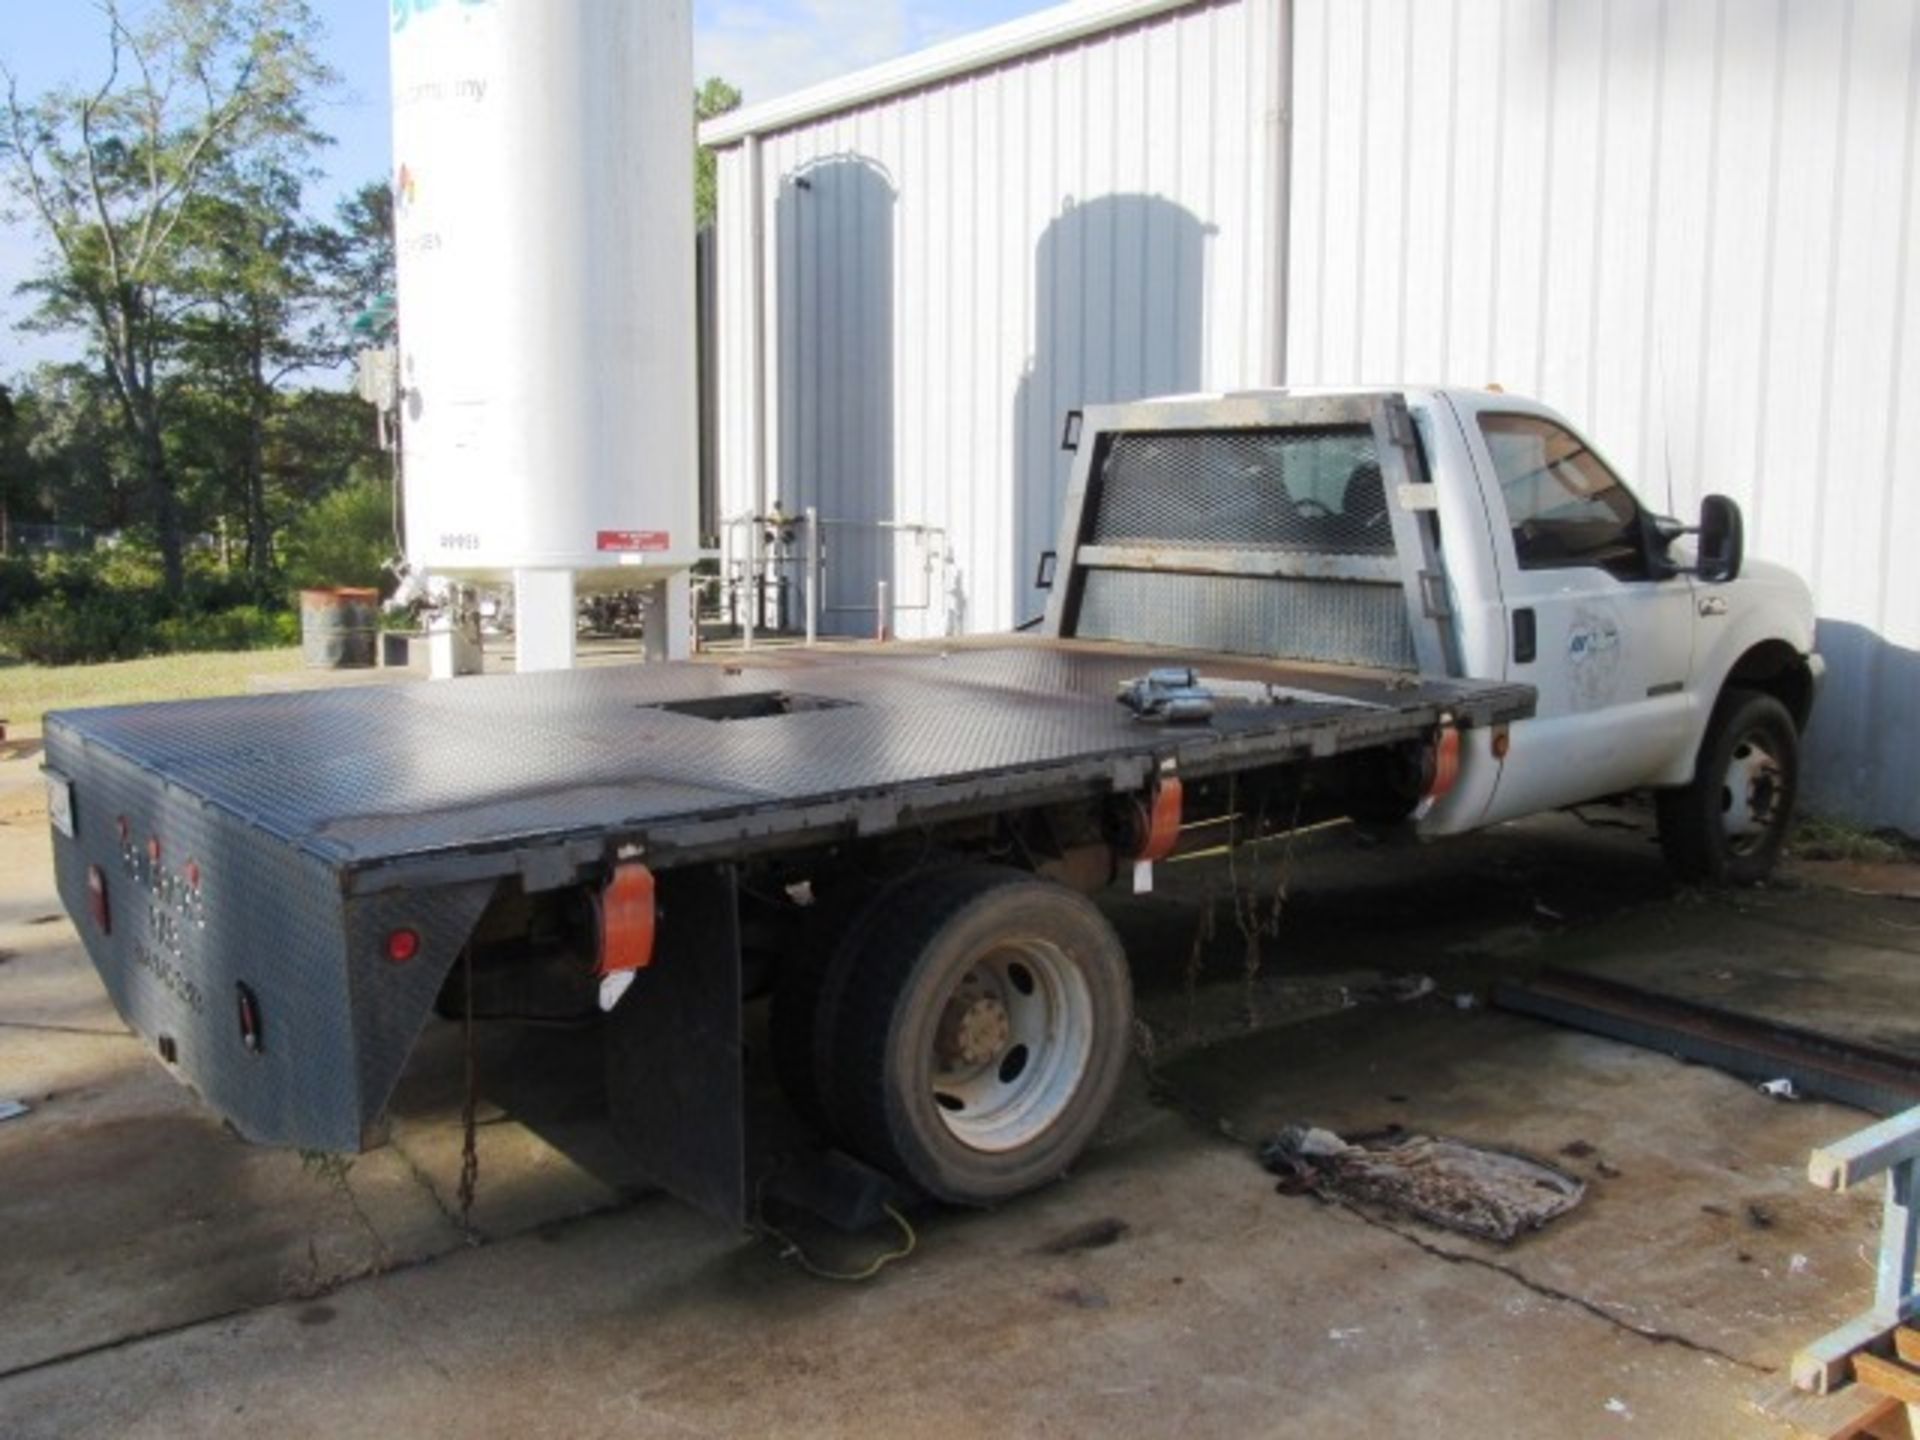 Ford F450 Super Duty Stake Body / Flatbed Truck with Power Stroke Diesel V8 Engine, 12' Steel Bed, - Image 4 of 7